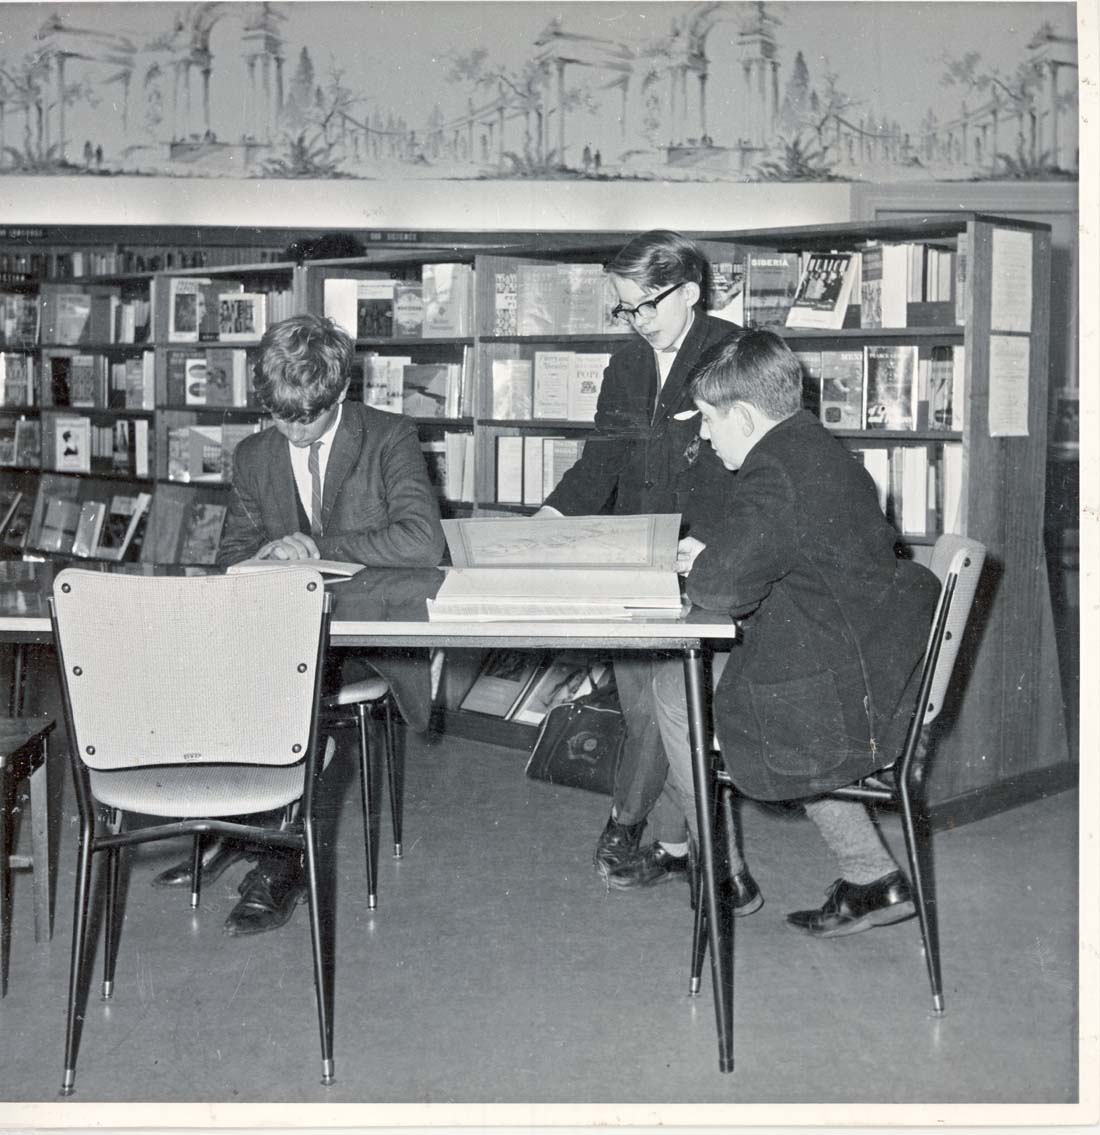 Image of School children in the library c.1950s